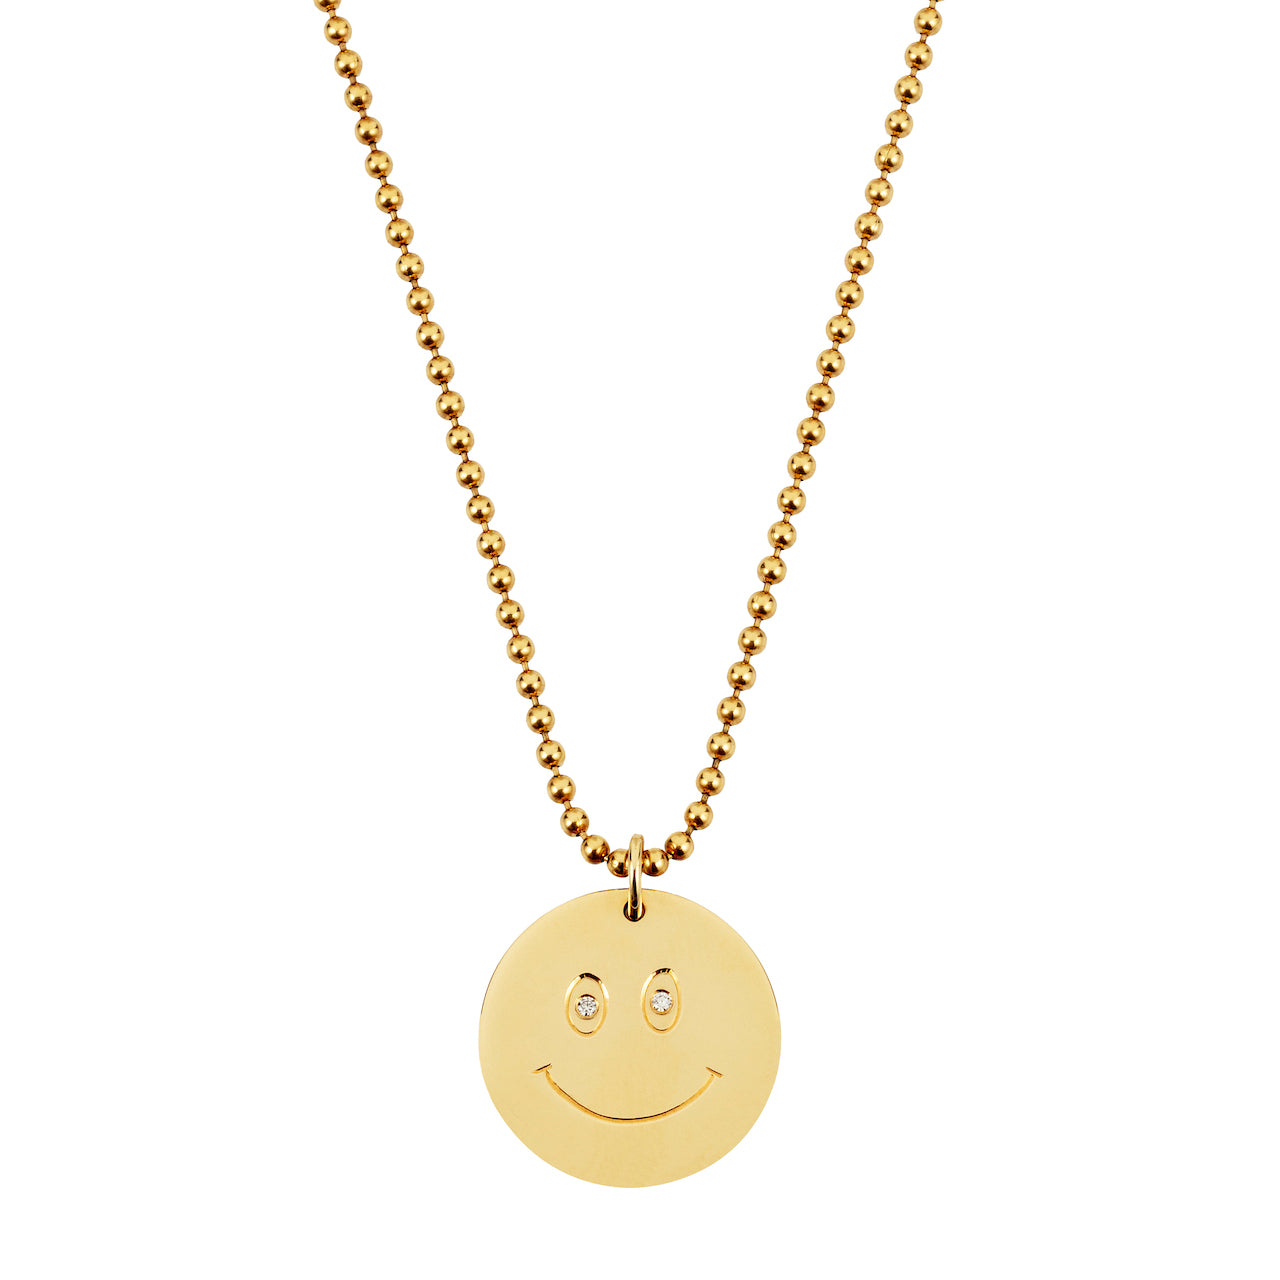 9ct Yellow Gold Disc Pendant with Engraved Smiley and Diamond Eyes